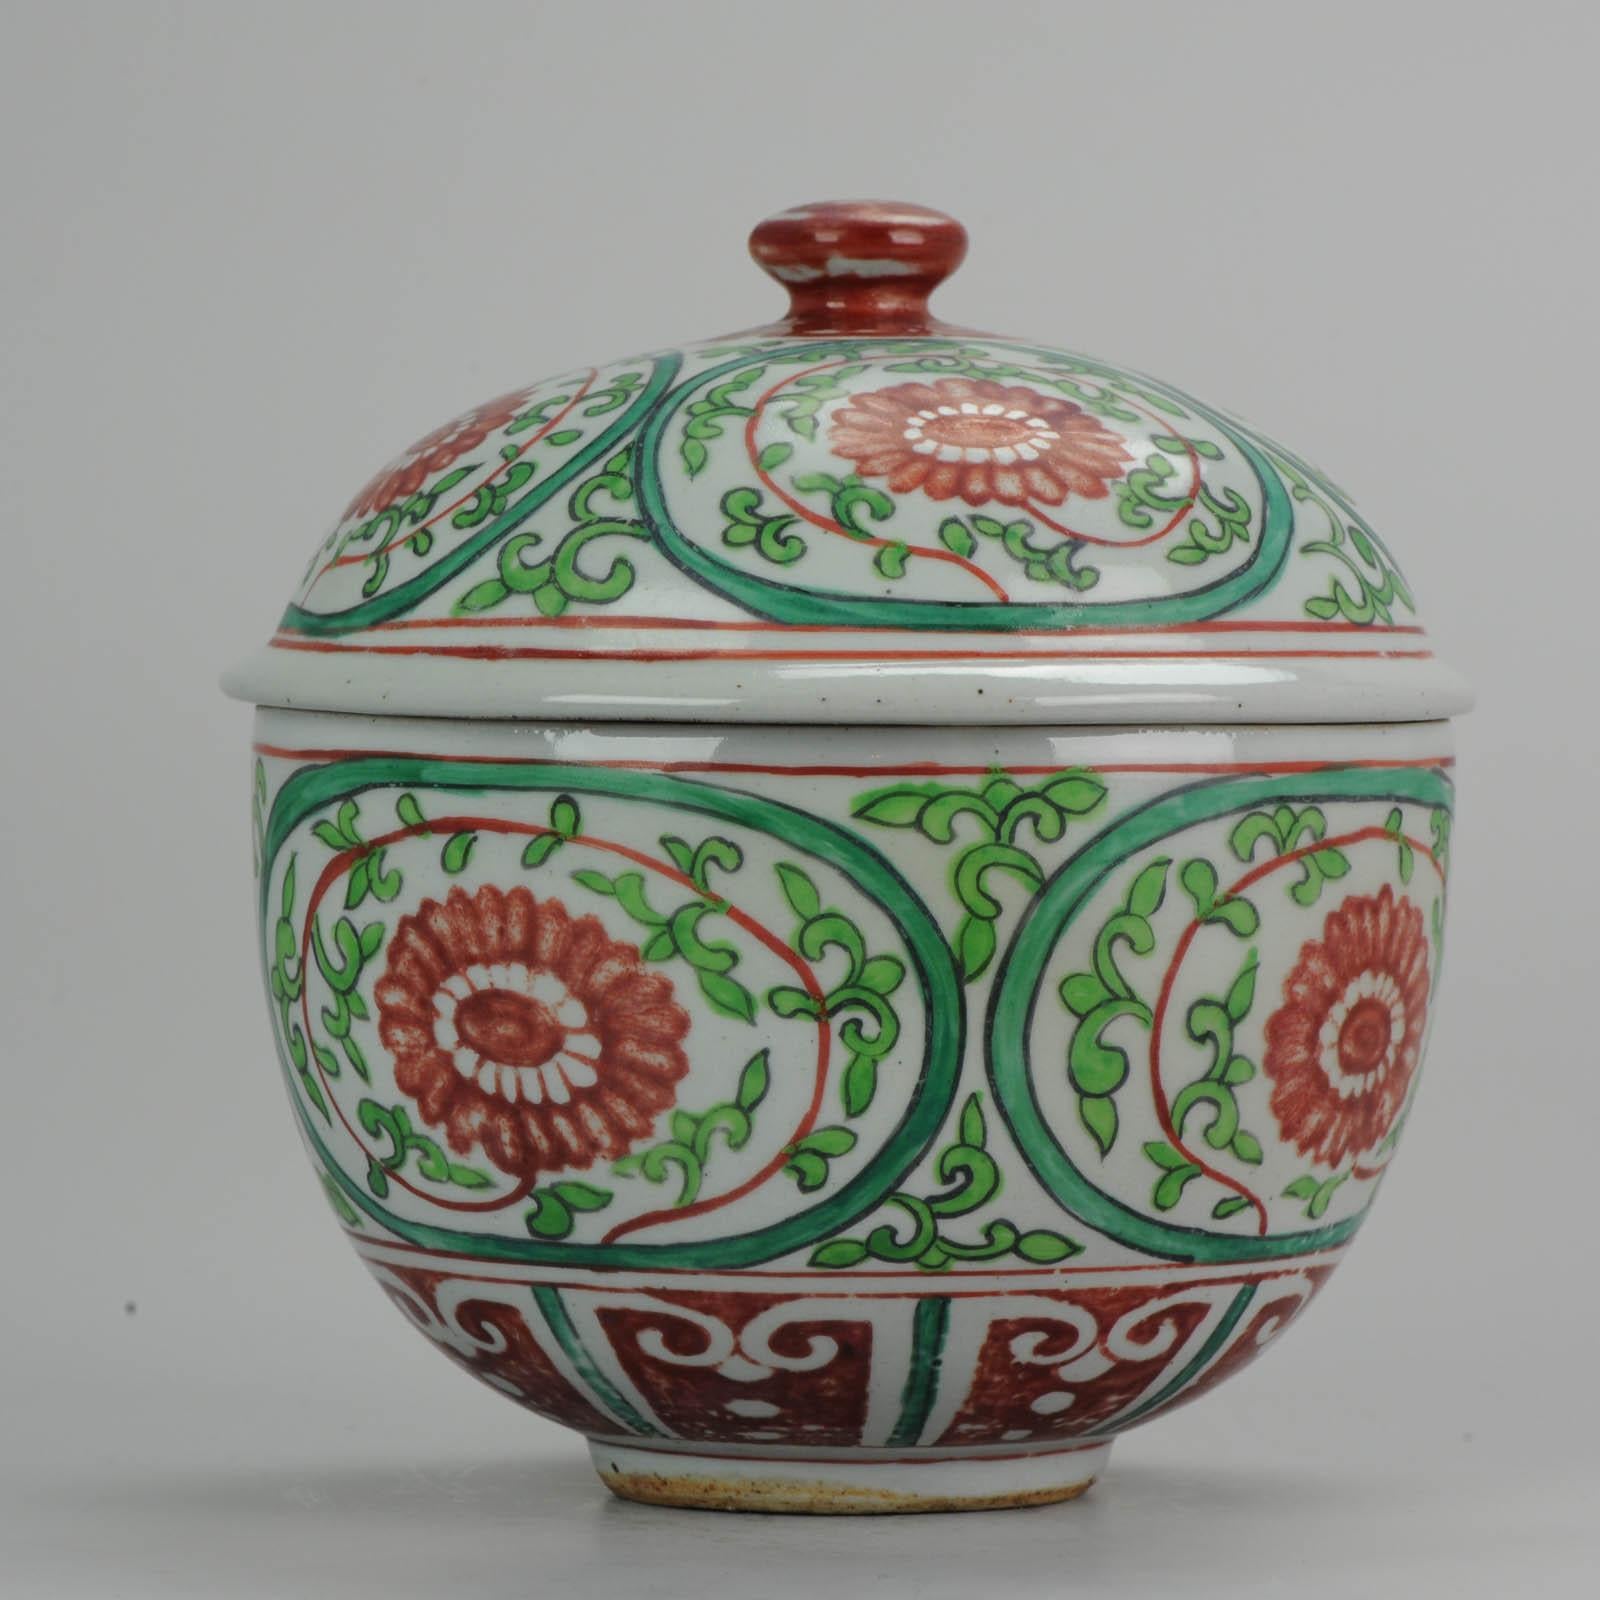 Antique Chinese Porcelain Jar 18th Century SE Asian Thai Market Bencharong Peony In Good Condition For Sale In Amsterdam, Noord Holland